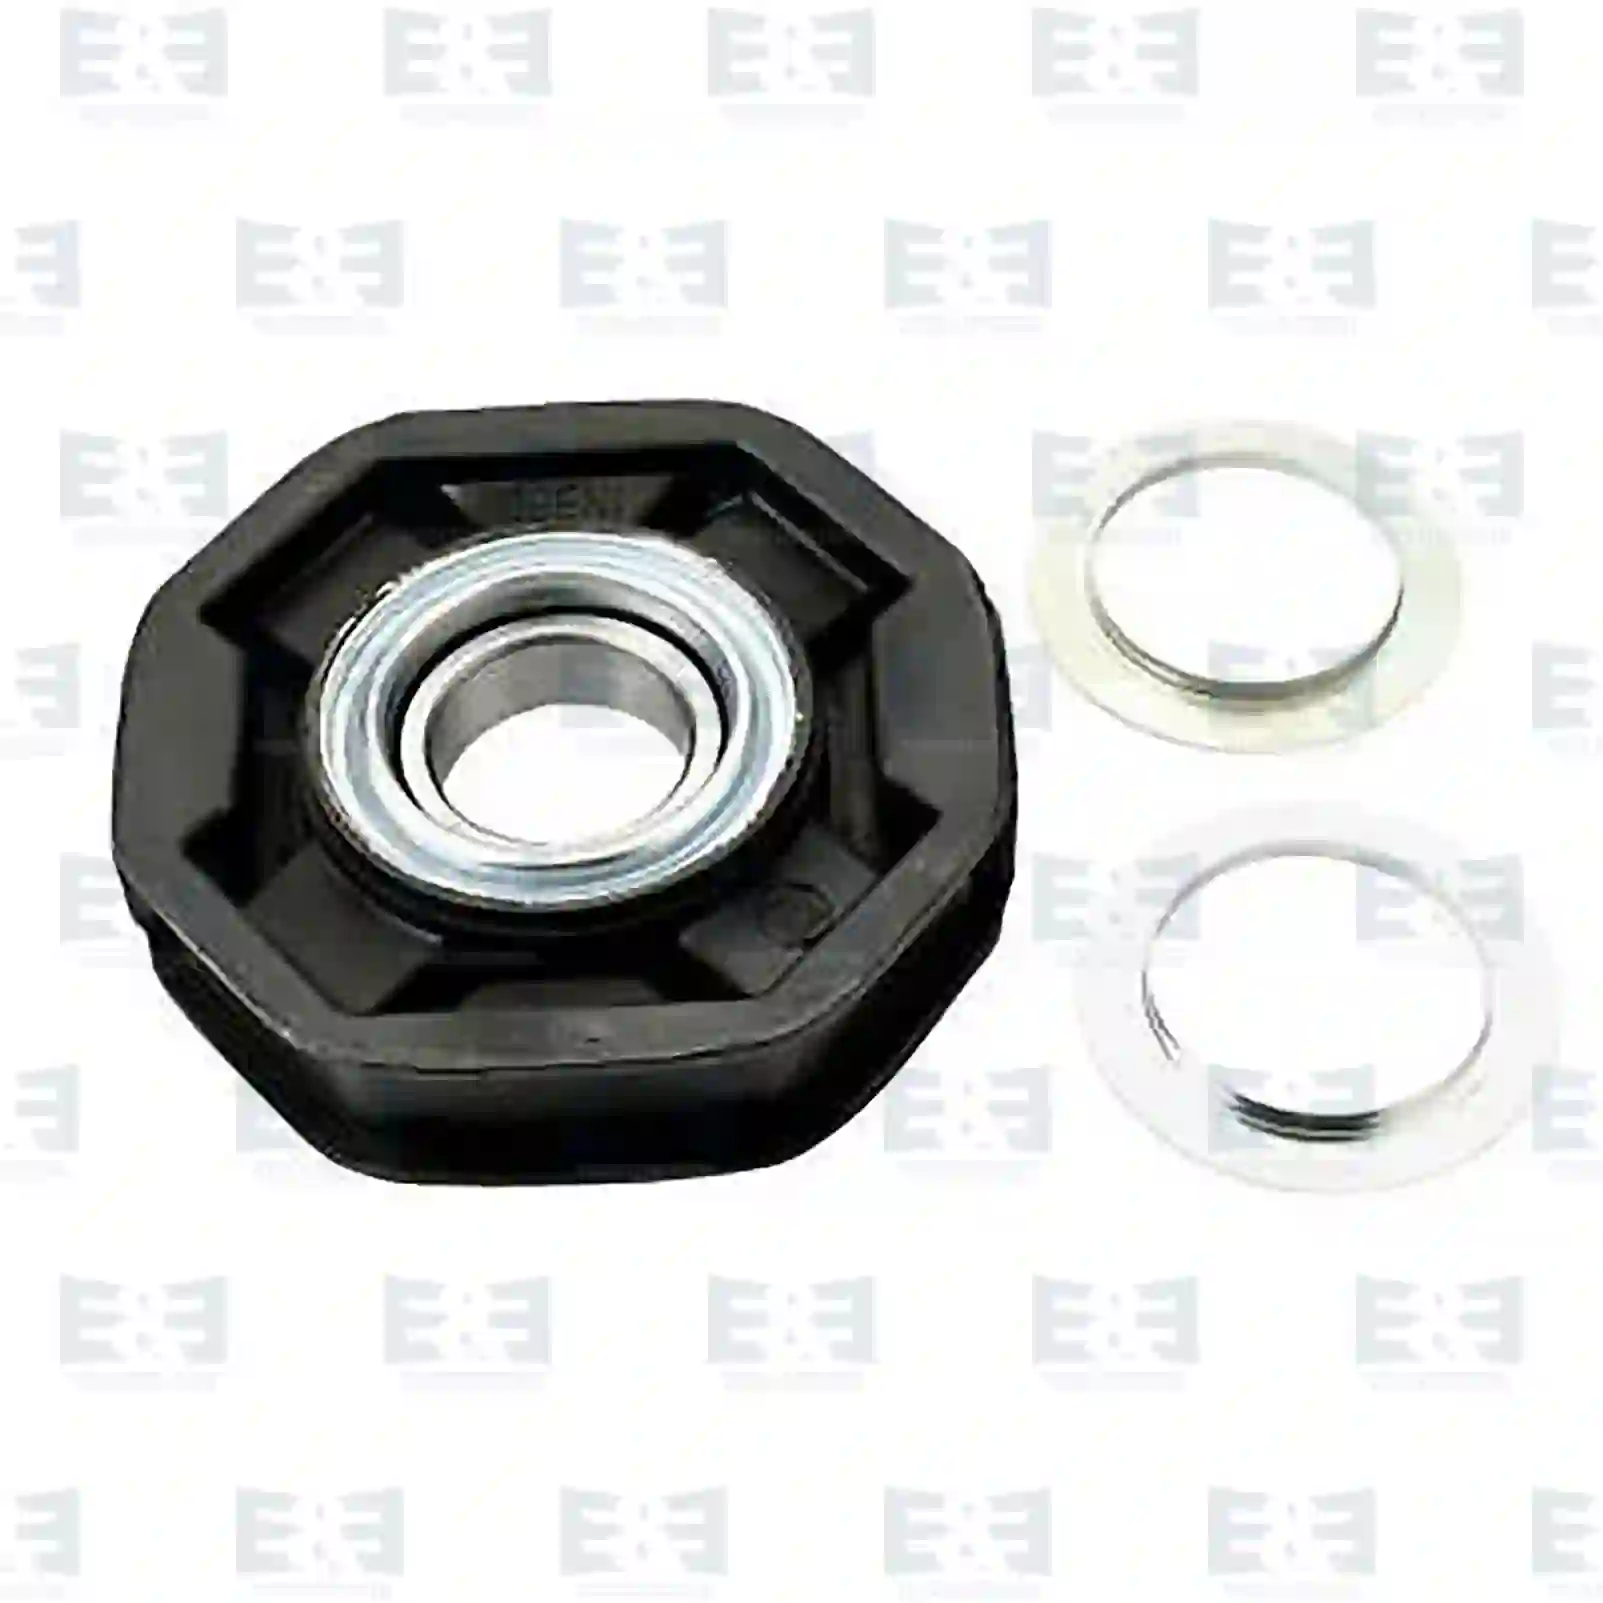 Support Bearing Center bearing, EE No 2E2276857 ,  oem no:3854100110, 3854100122, 3854100222, 3854100922, 3854101722, 3855860141 E&E Truck Spare Parts | Truck Spare Parts, Auotomotive Spare Parts